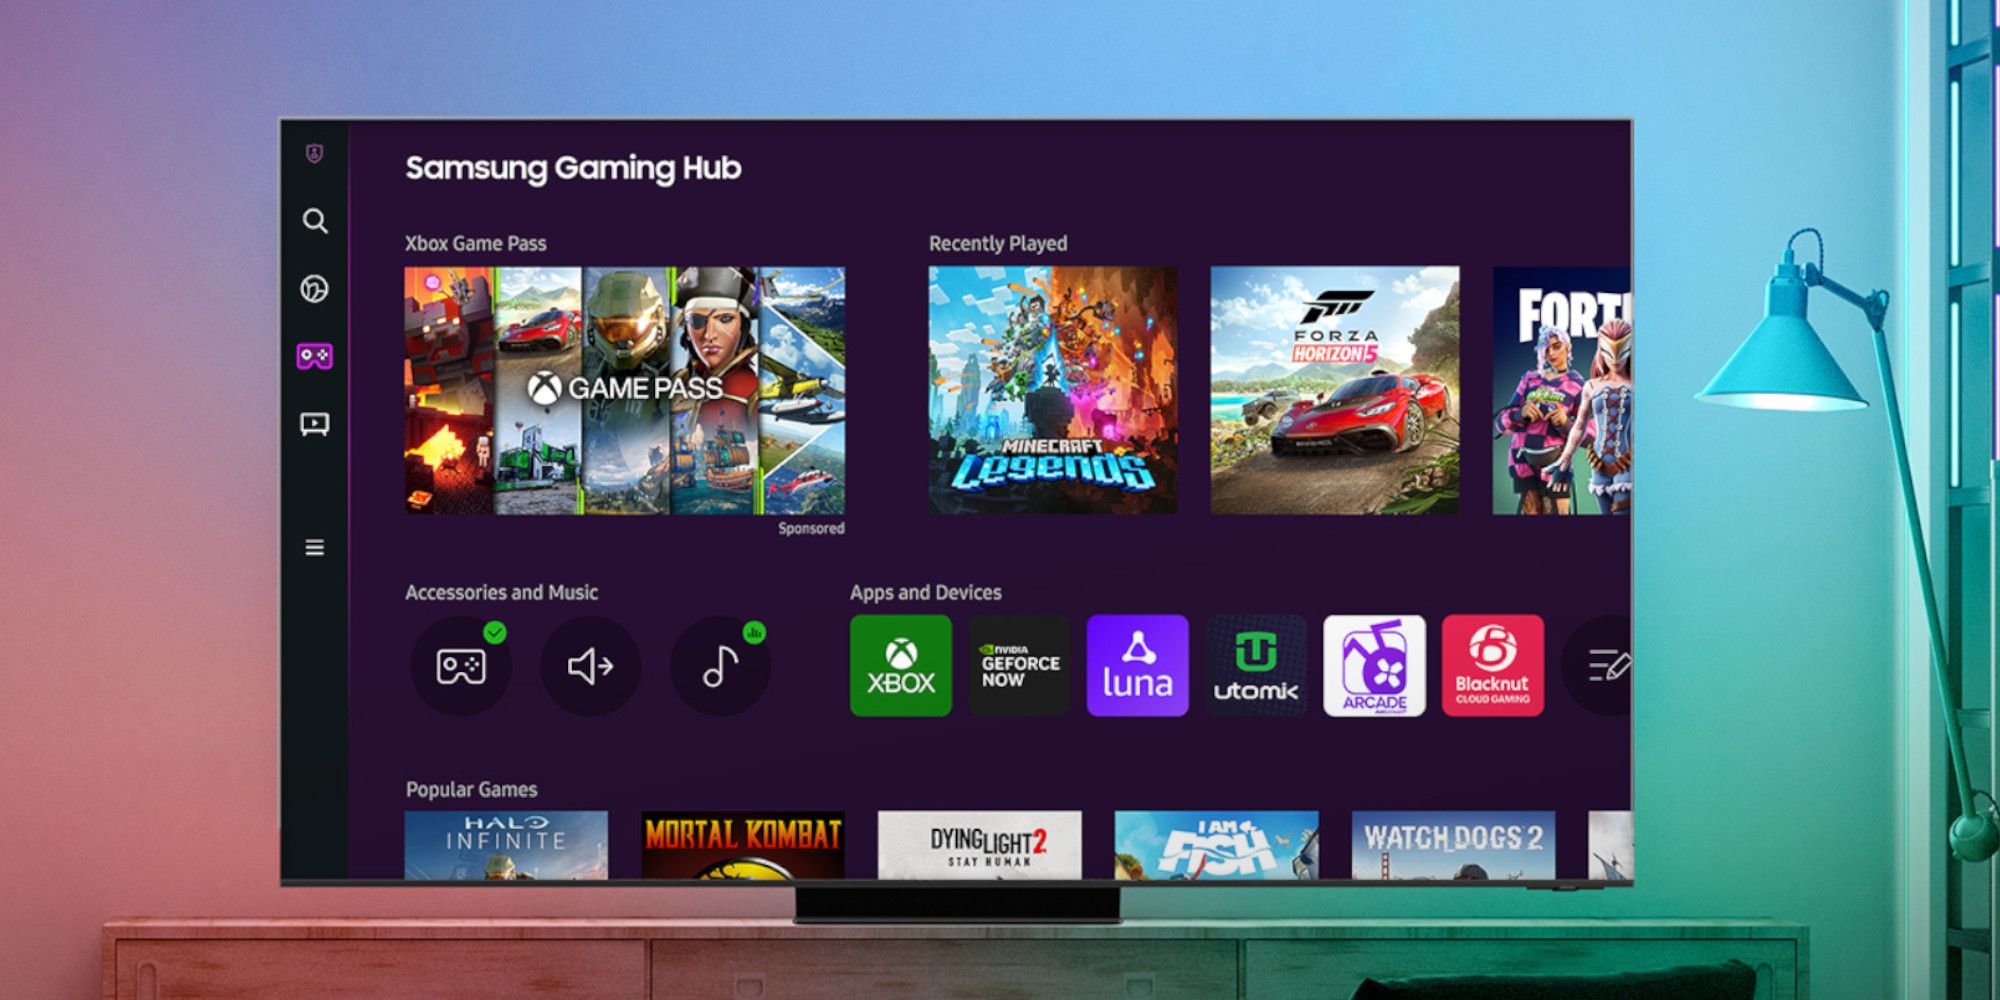 This Samsung Gaming Hub TV Offers The Best Cloud Gaming Experience